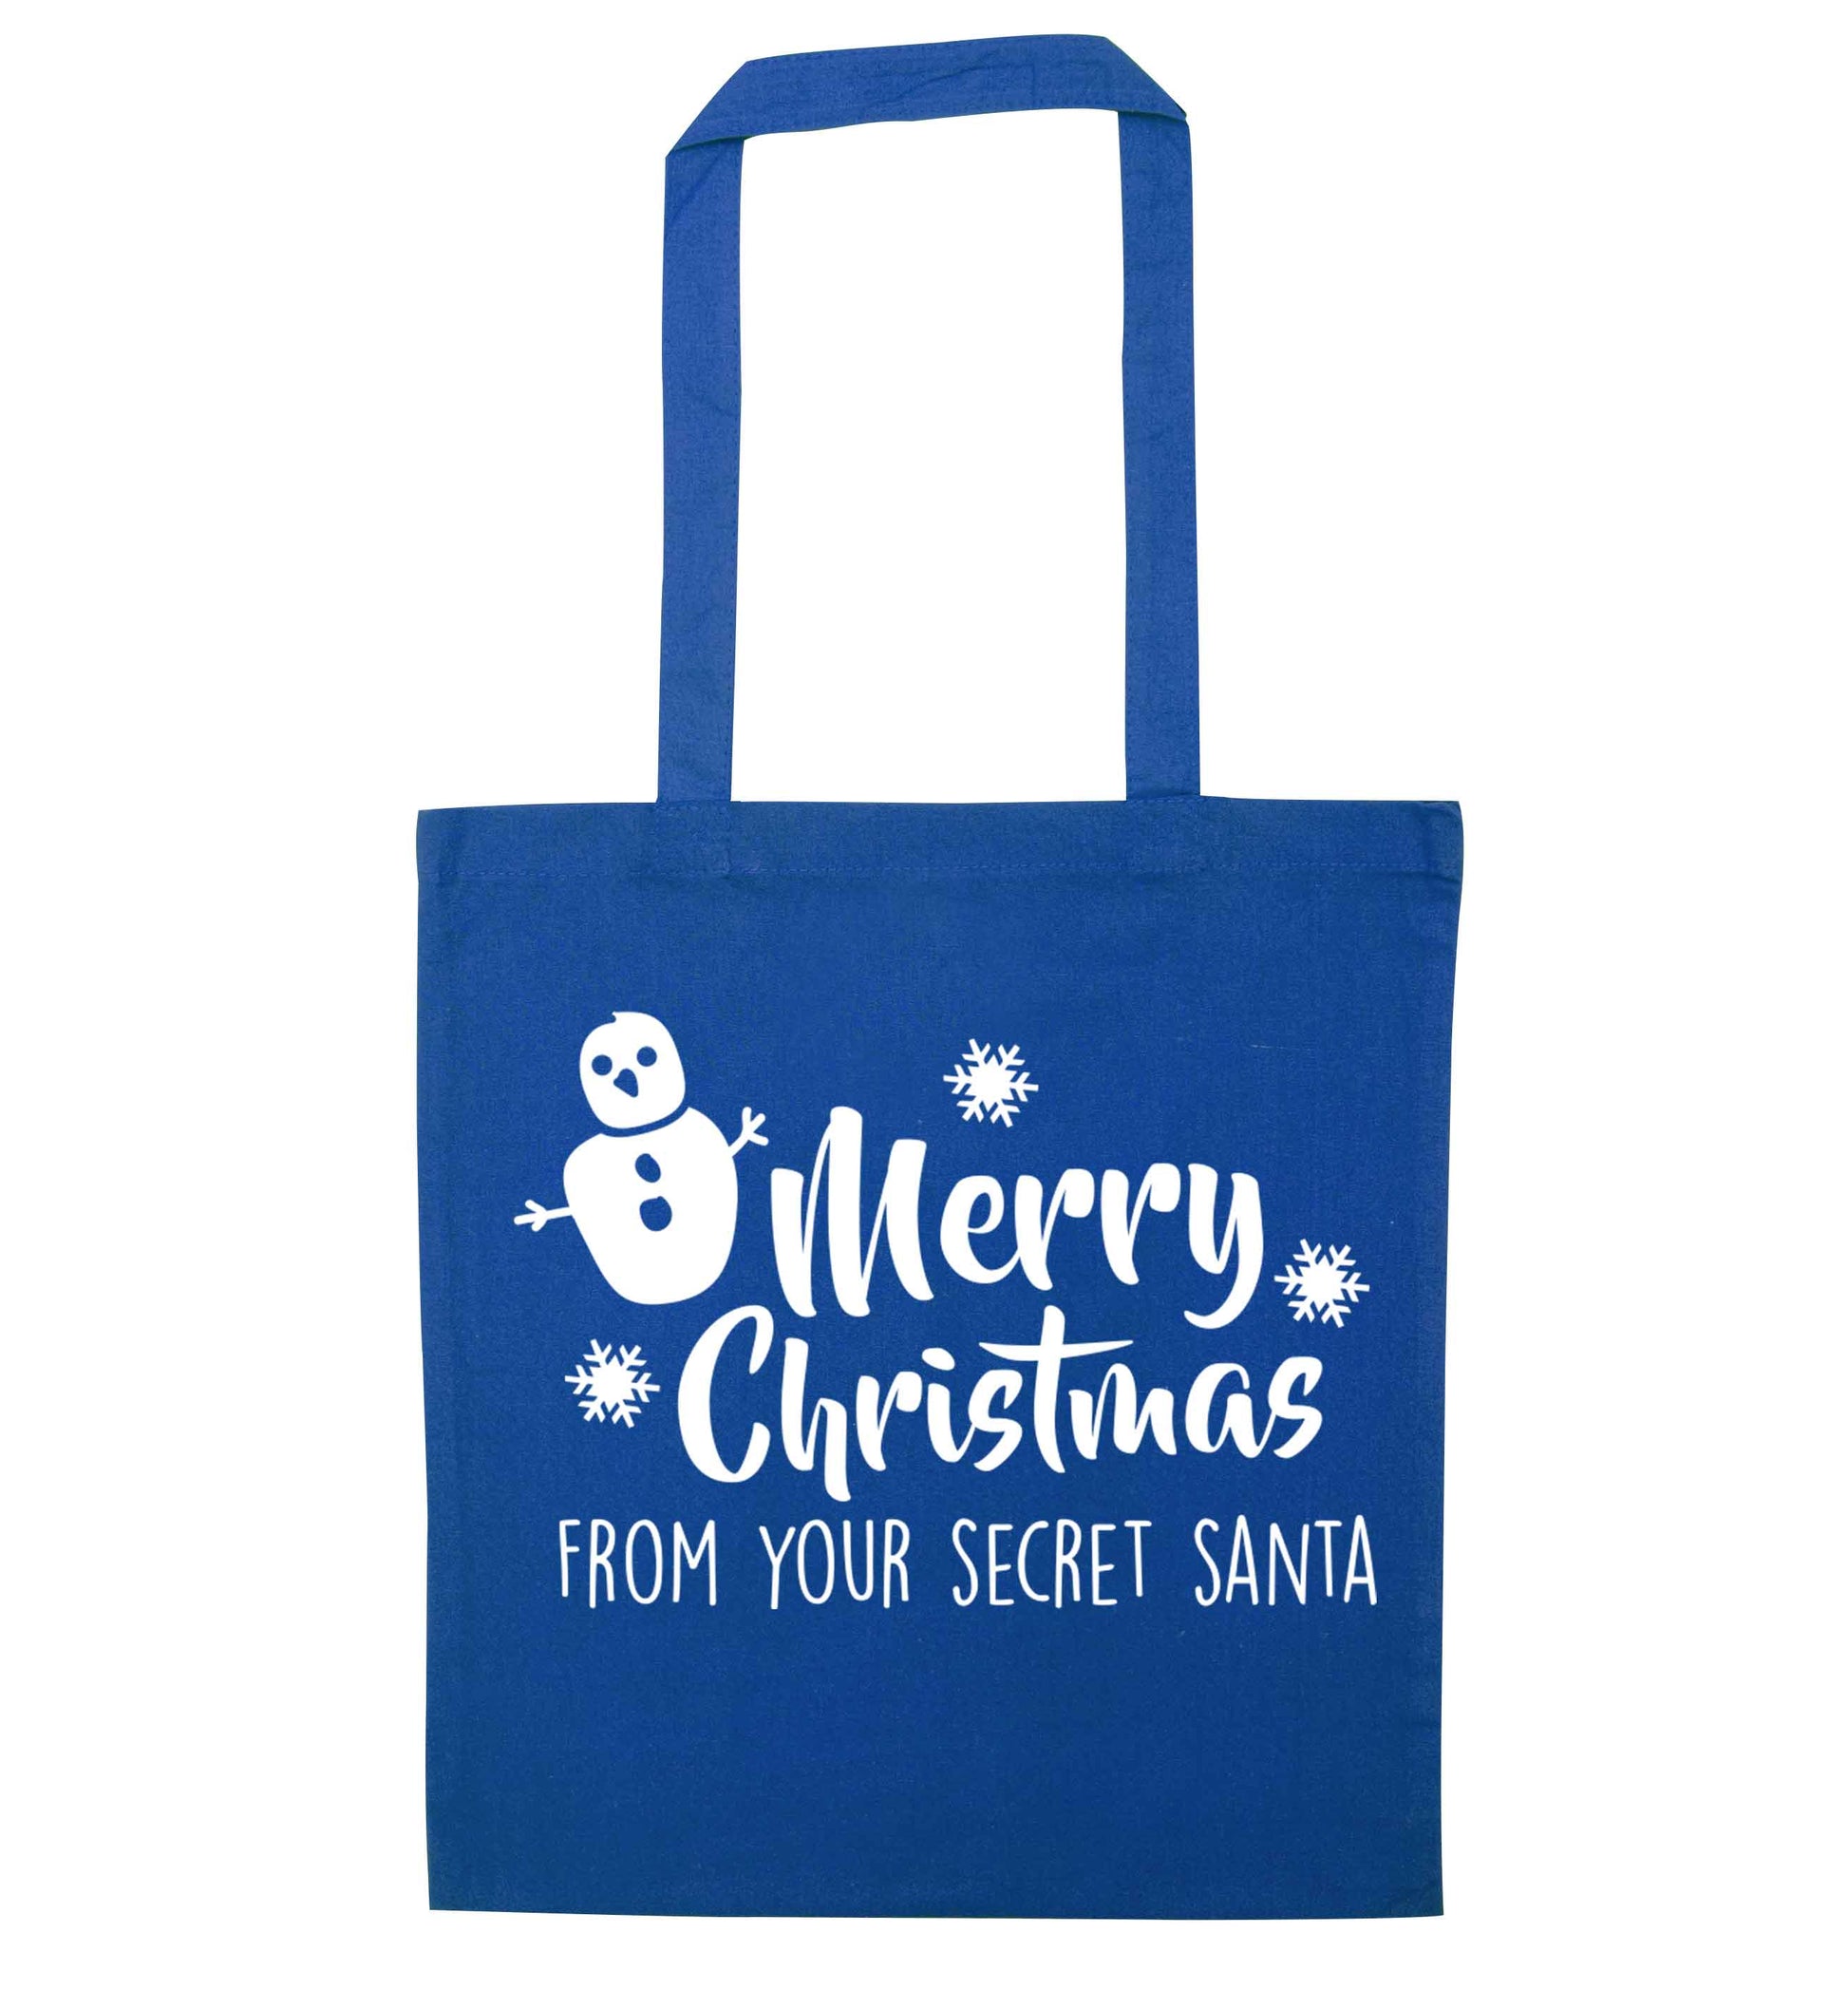 Merry Christmas from your secret Santa blue tote bag